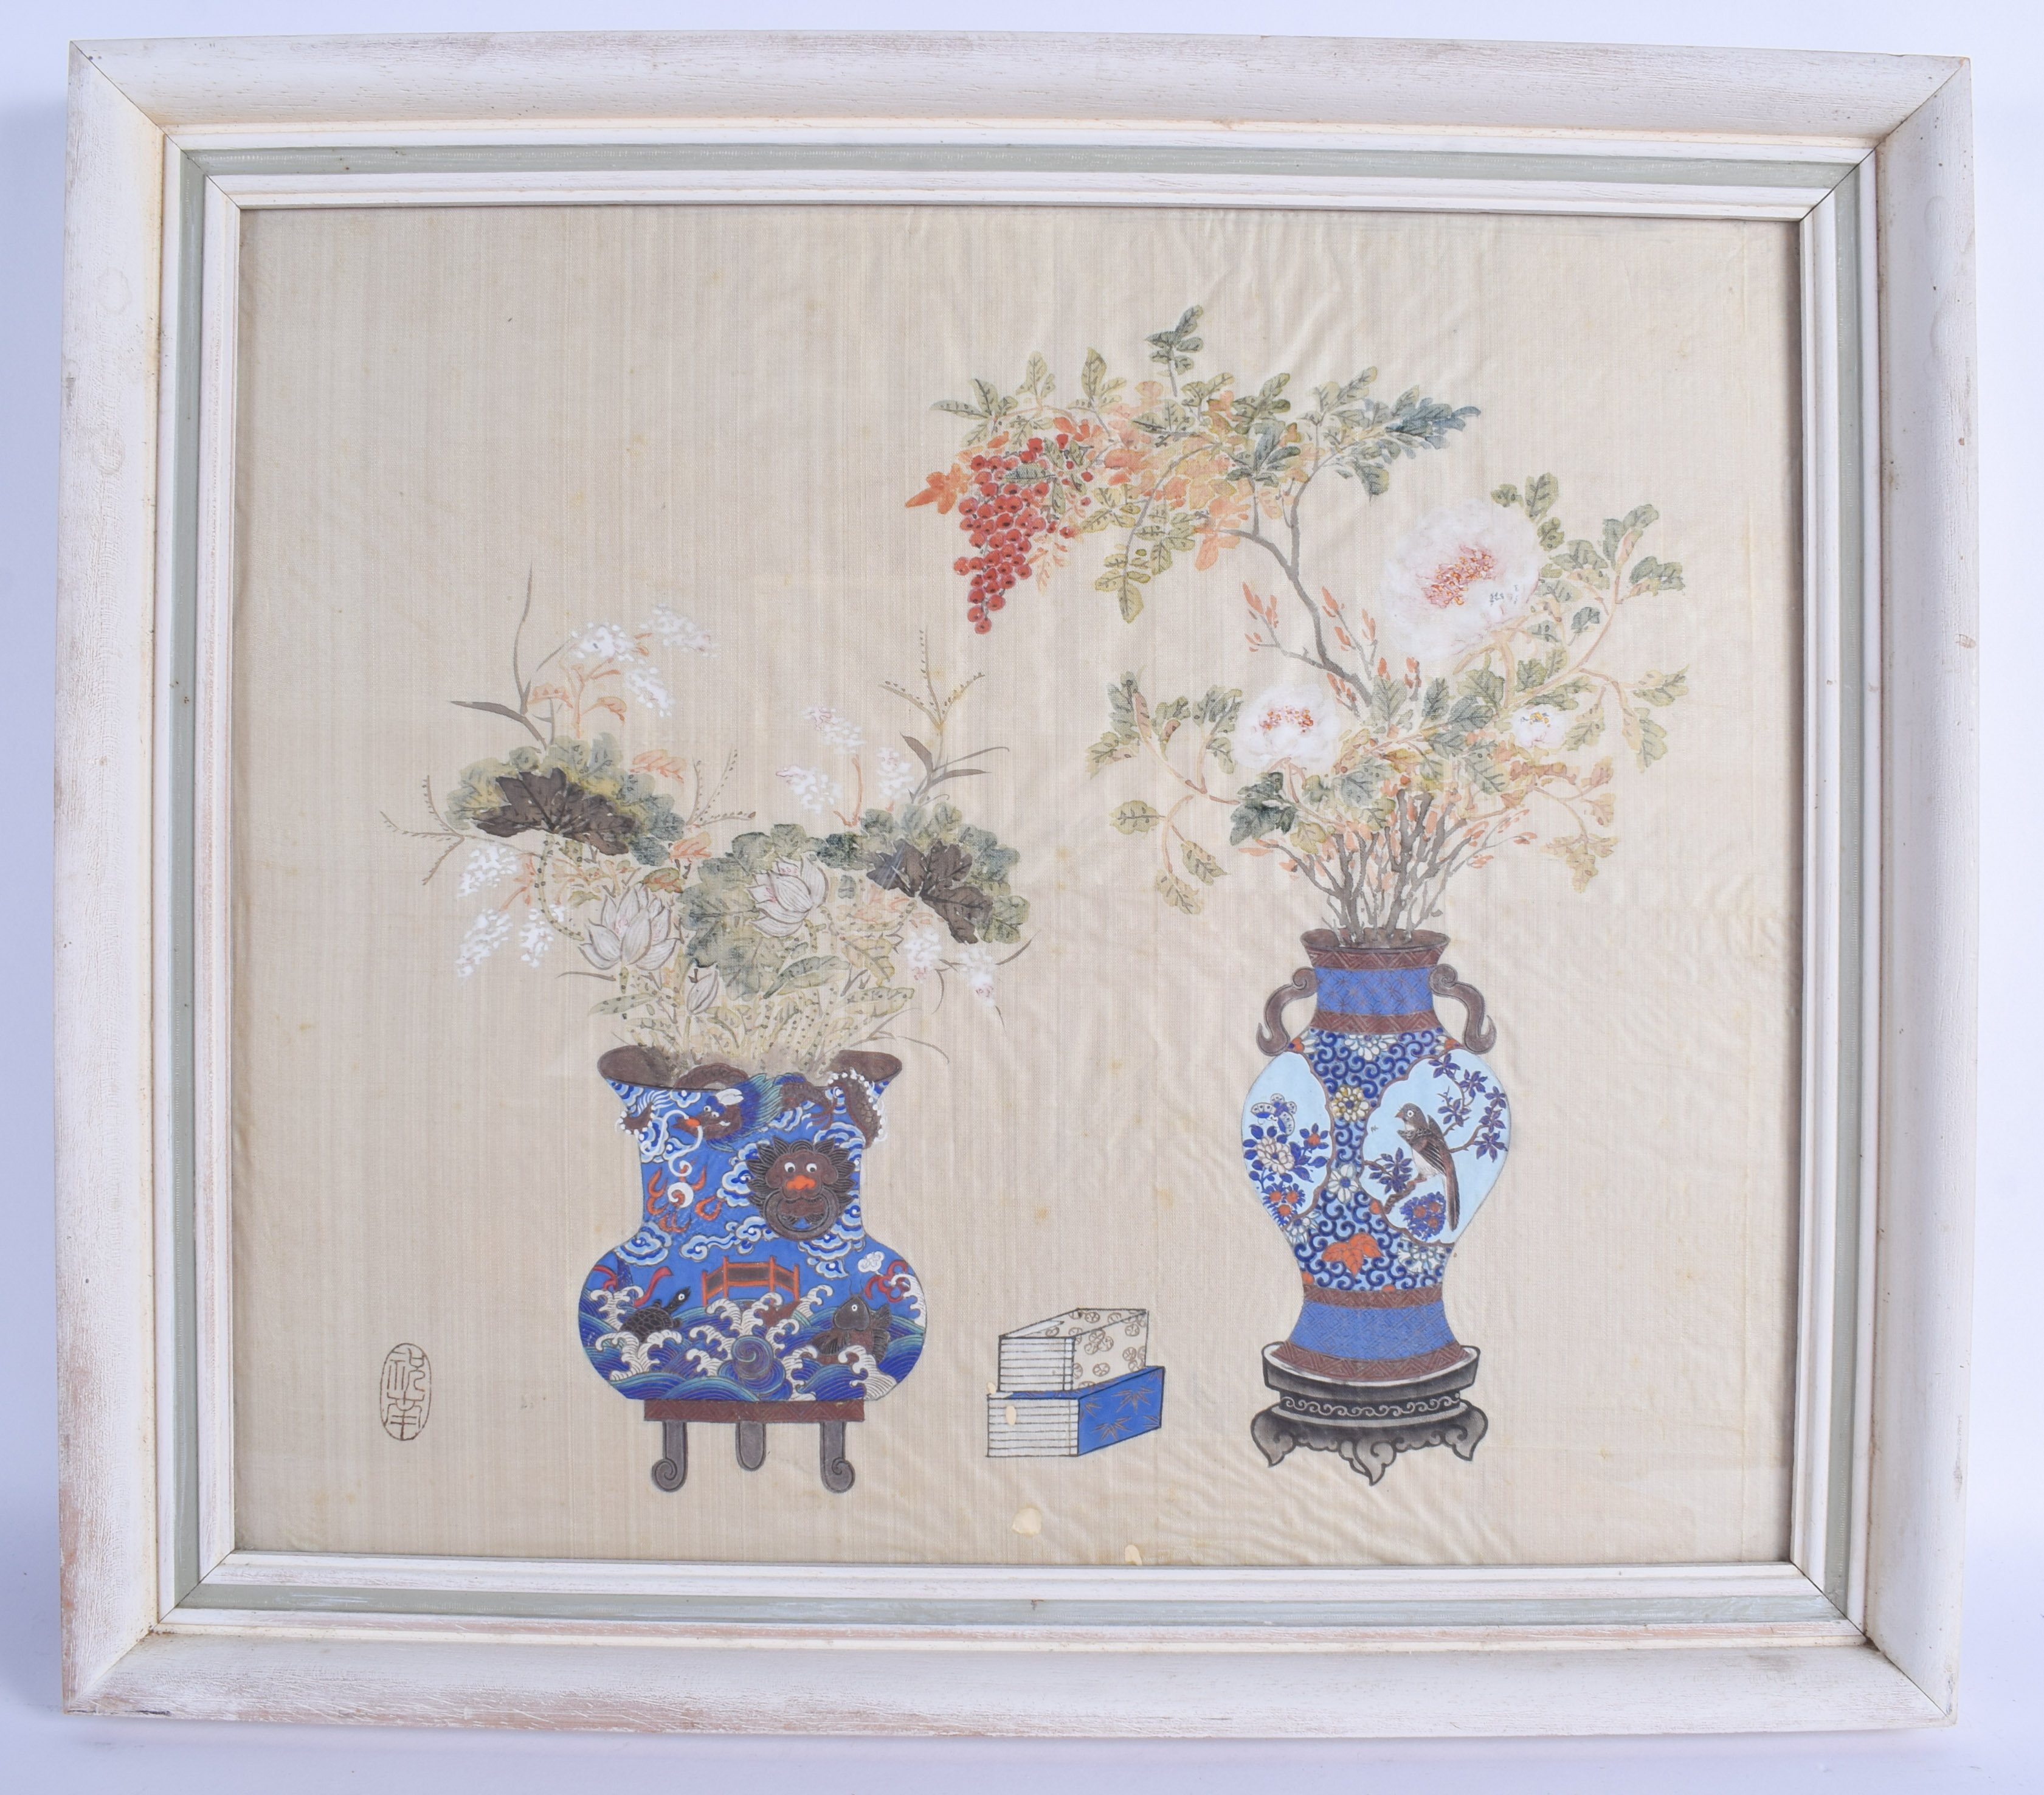 A PAIR OF 19TH CENTURY CHINESE WATERCOLOUR PANELS Qing, depicting still lifes. Image 39 cm x 46 cm. - Image 5 of 8